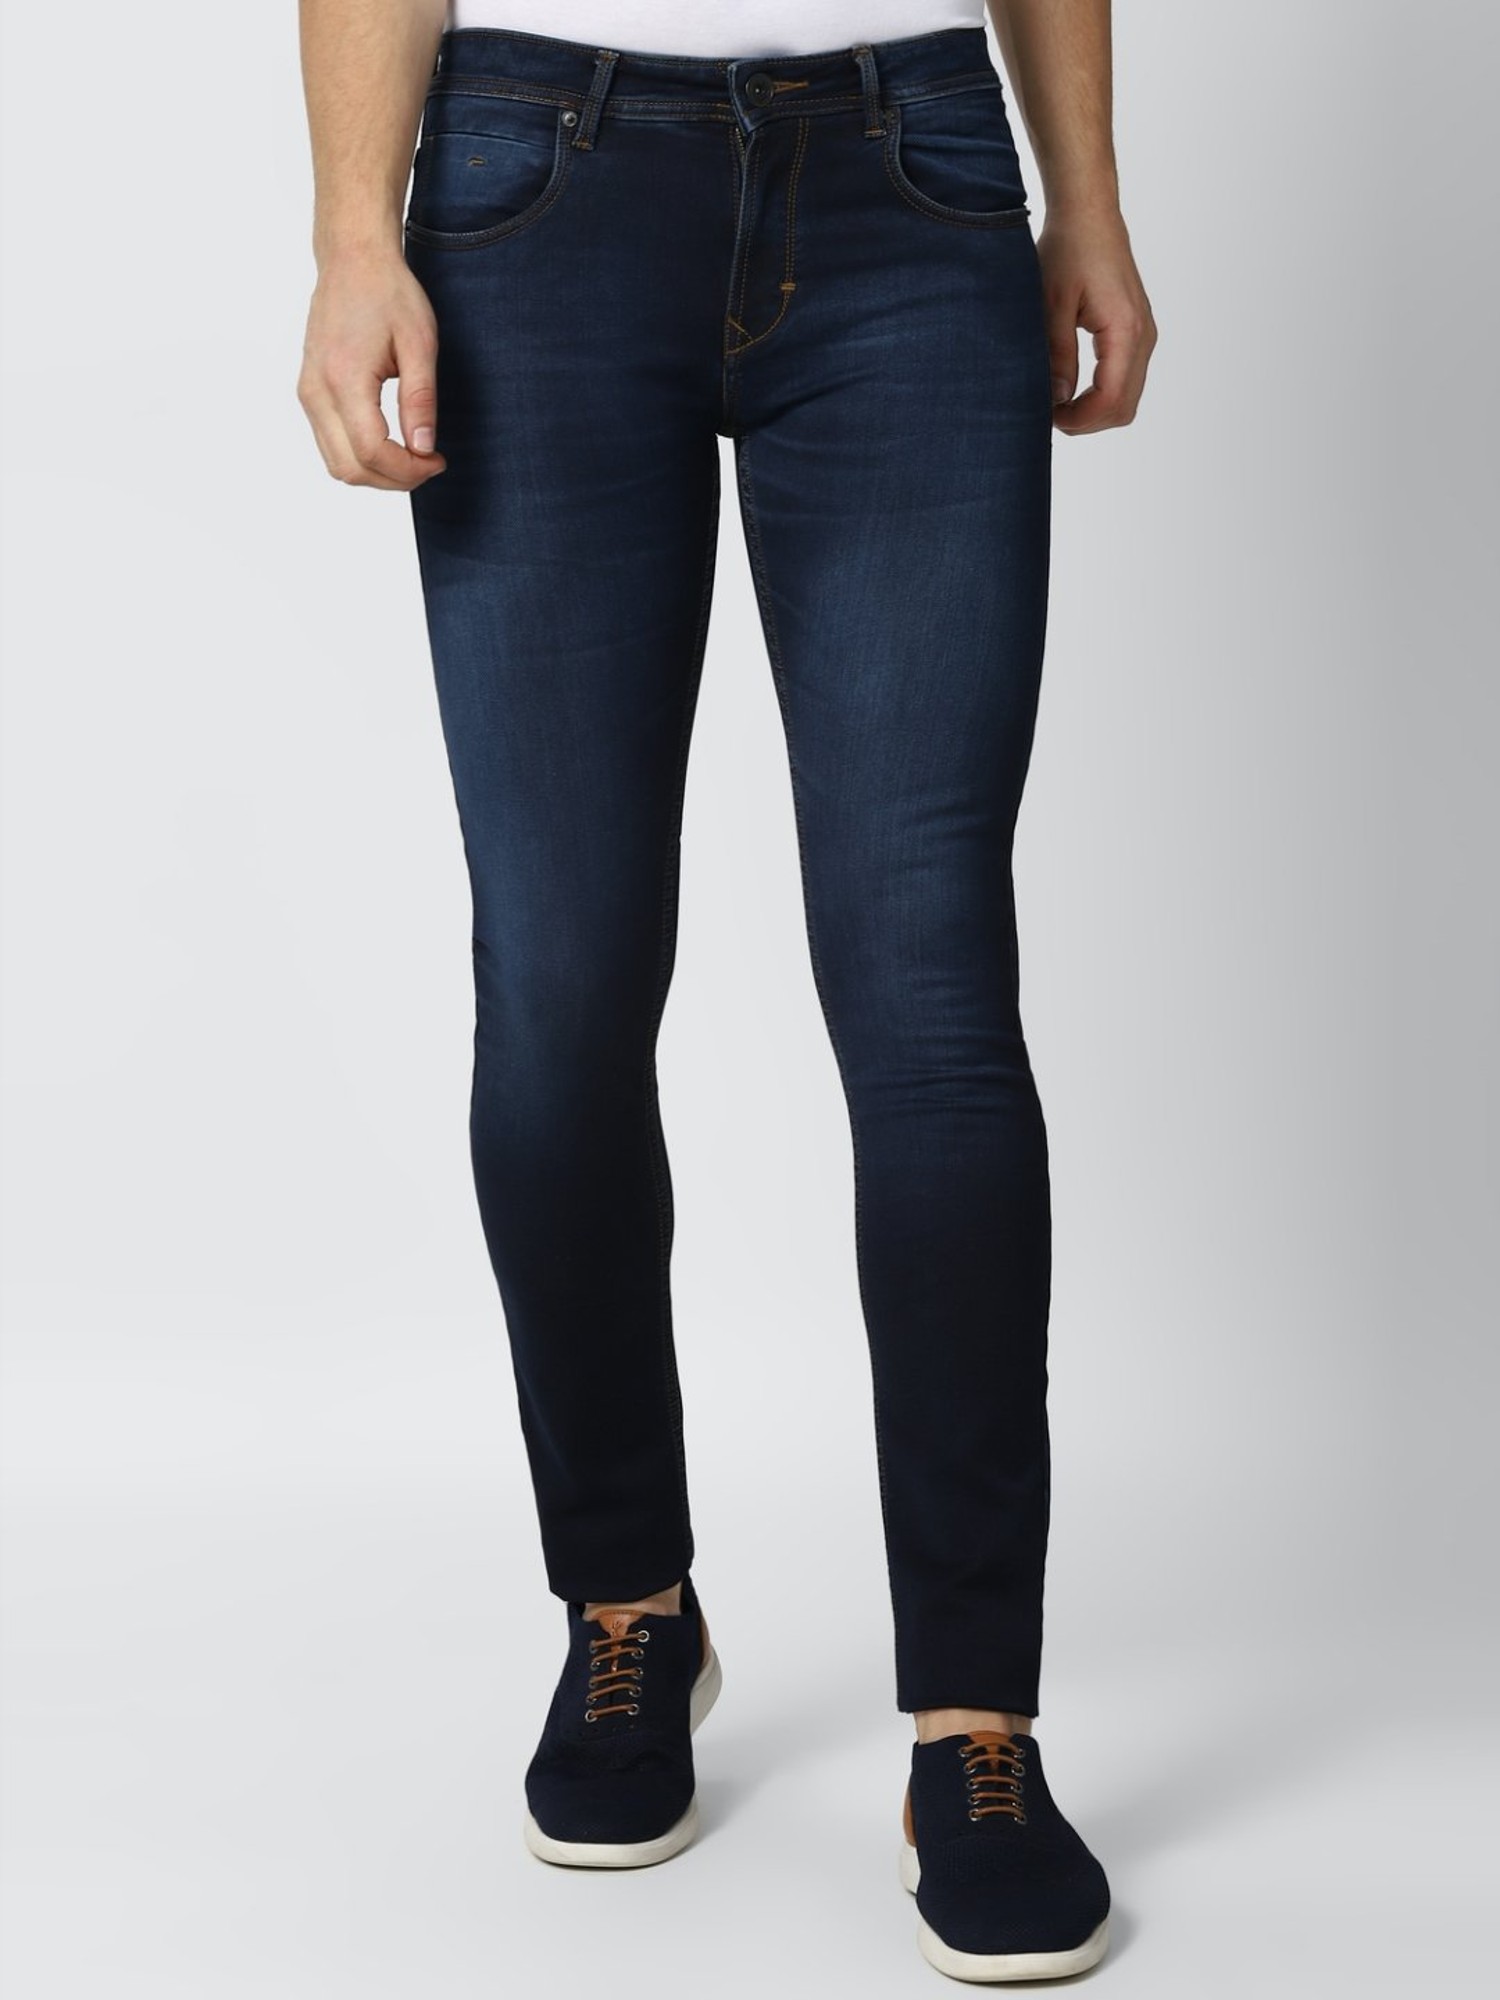 Peter England Casual Jeans - Buy Peter England Casual Jeans online in India